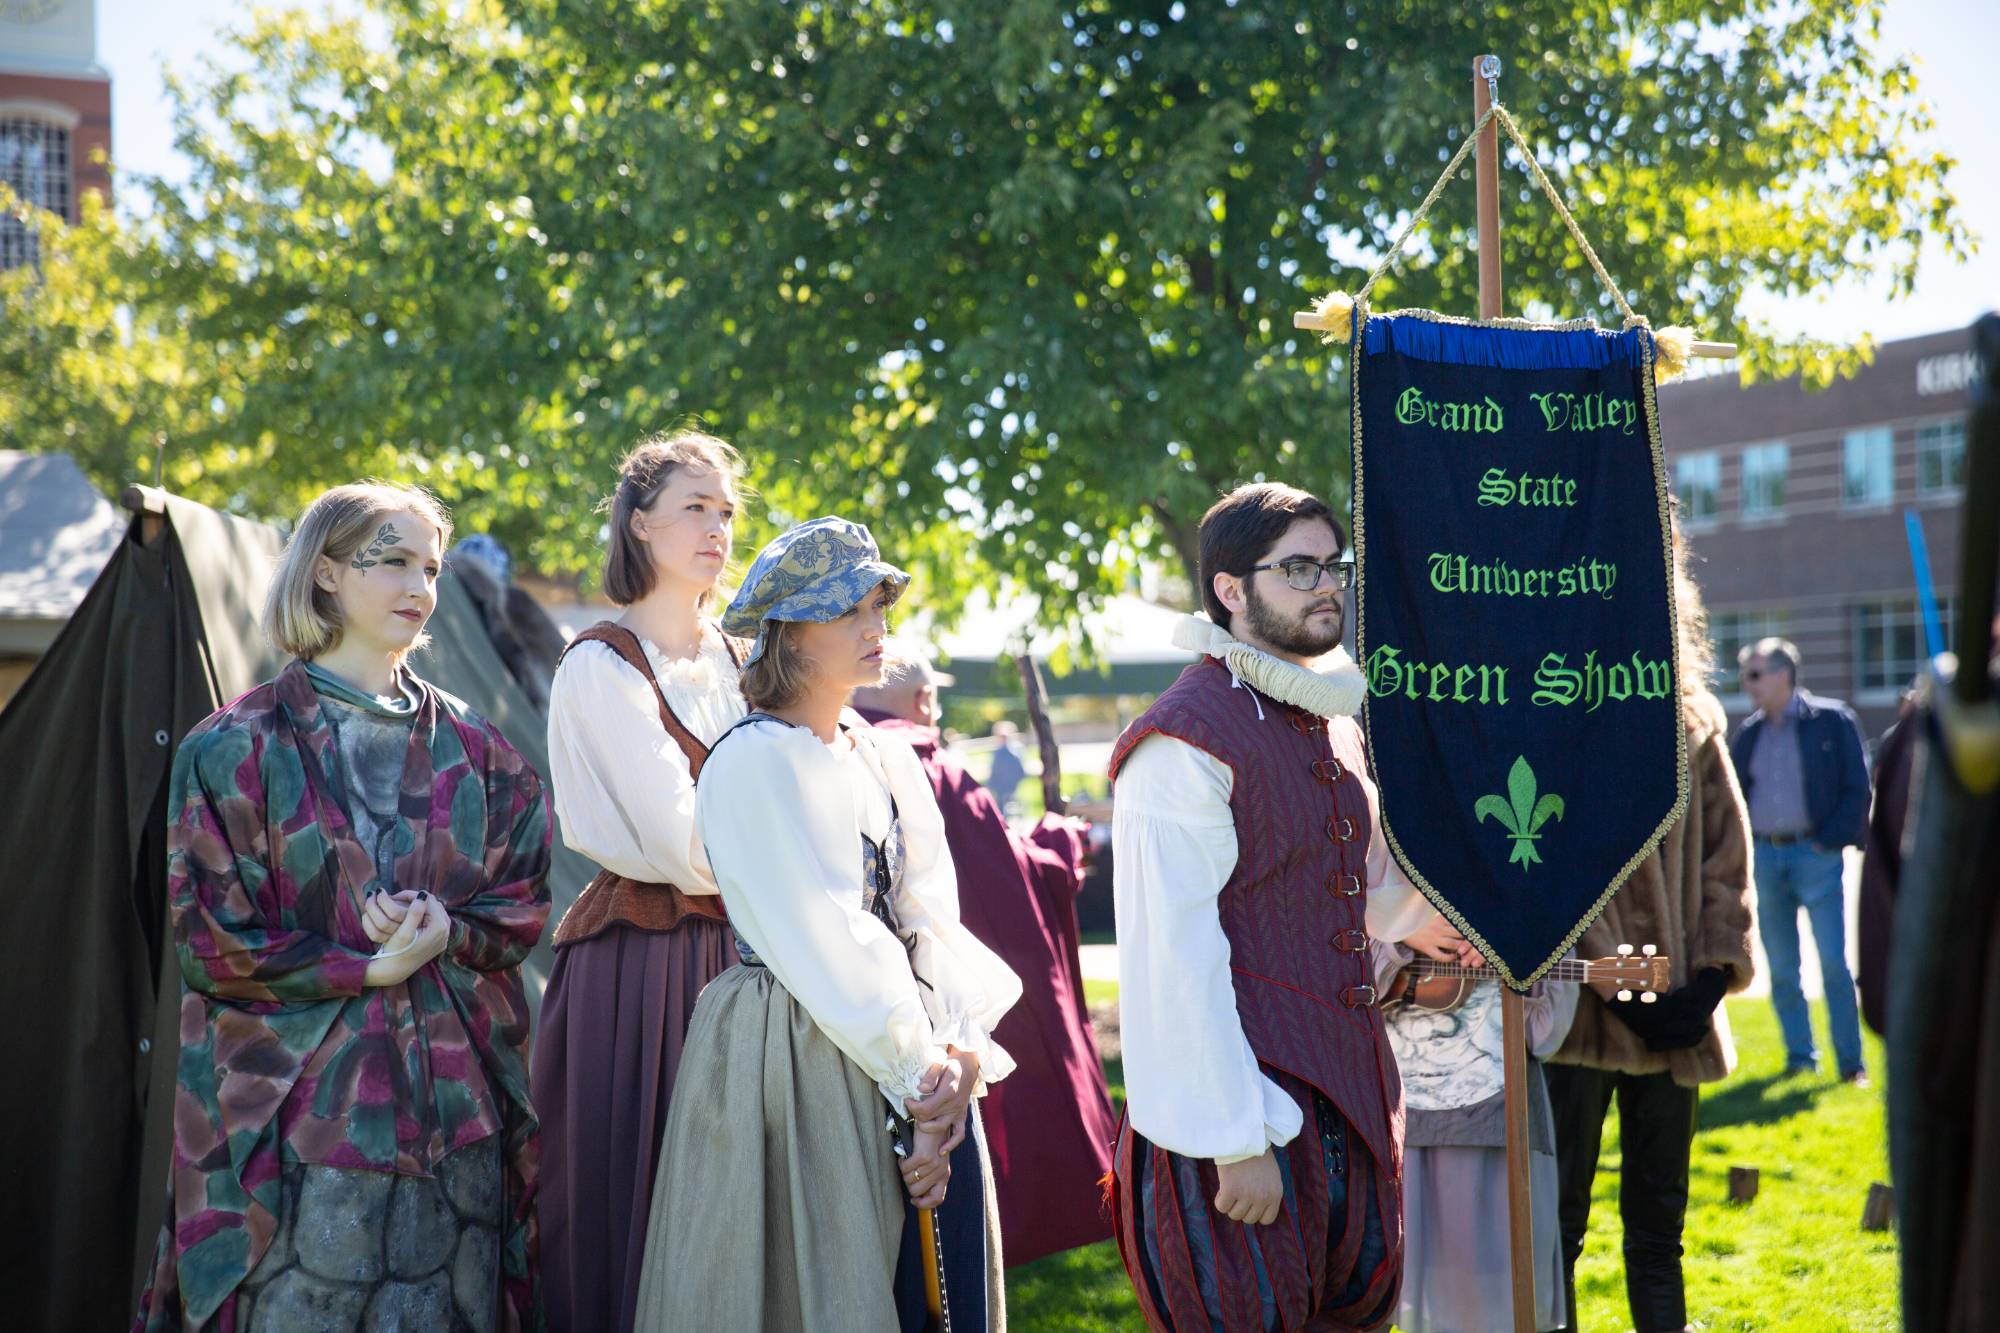 The Grand Valley Green Show at the Renaissance Faire.